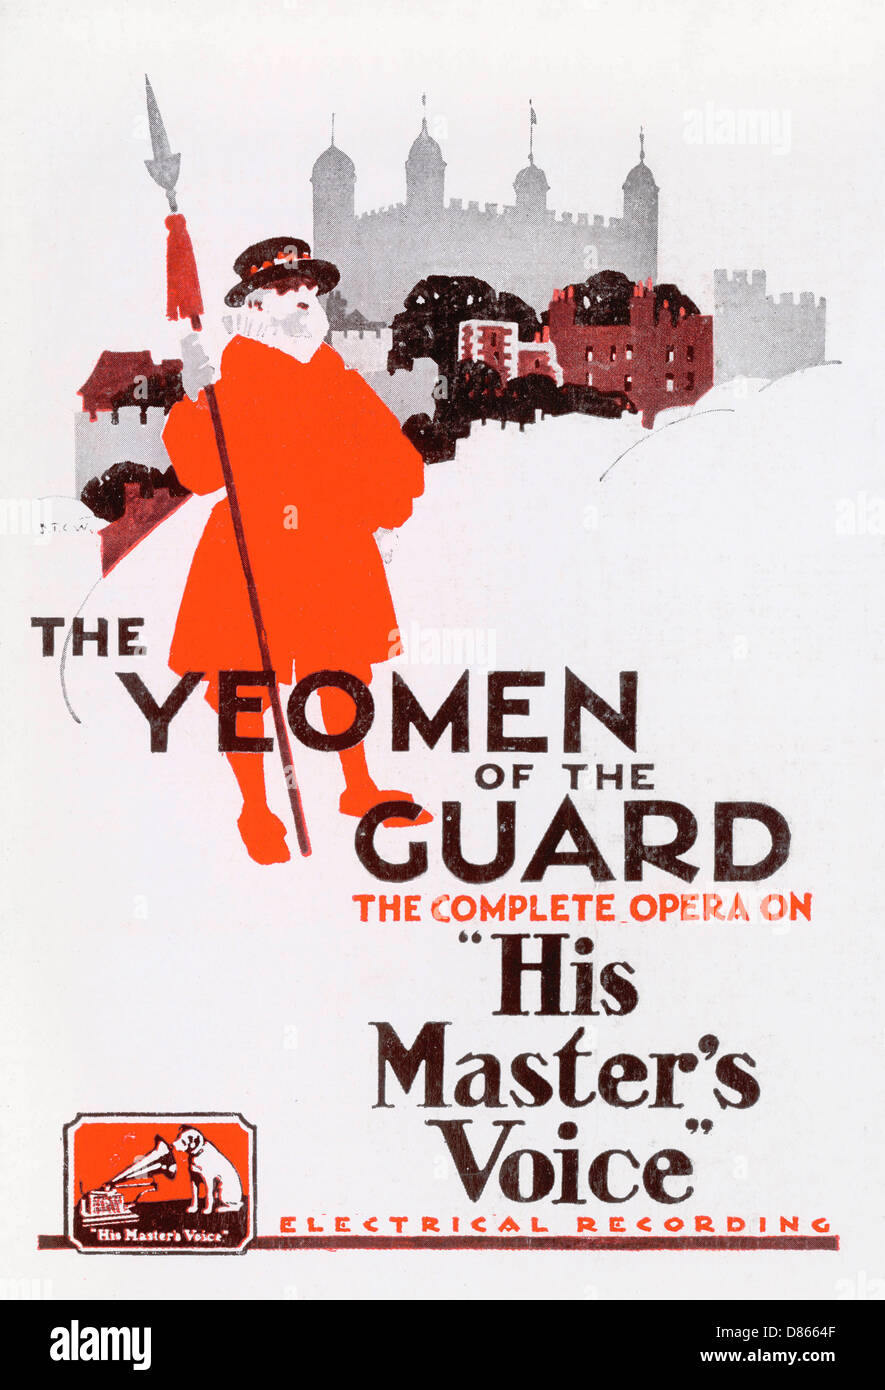 G&S The Yeomen of the Guard recording 1929 Stock Photo